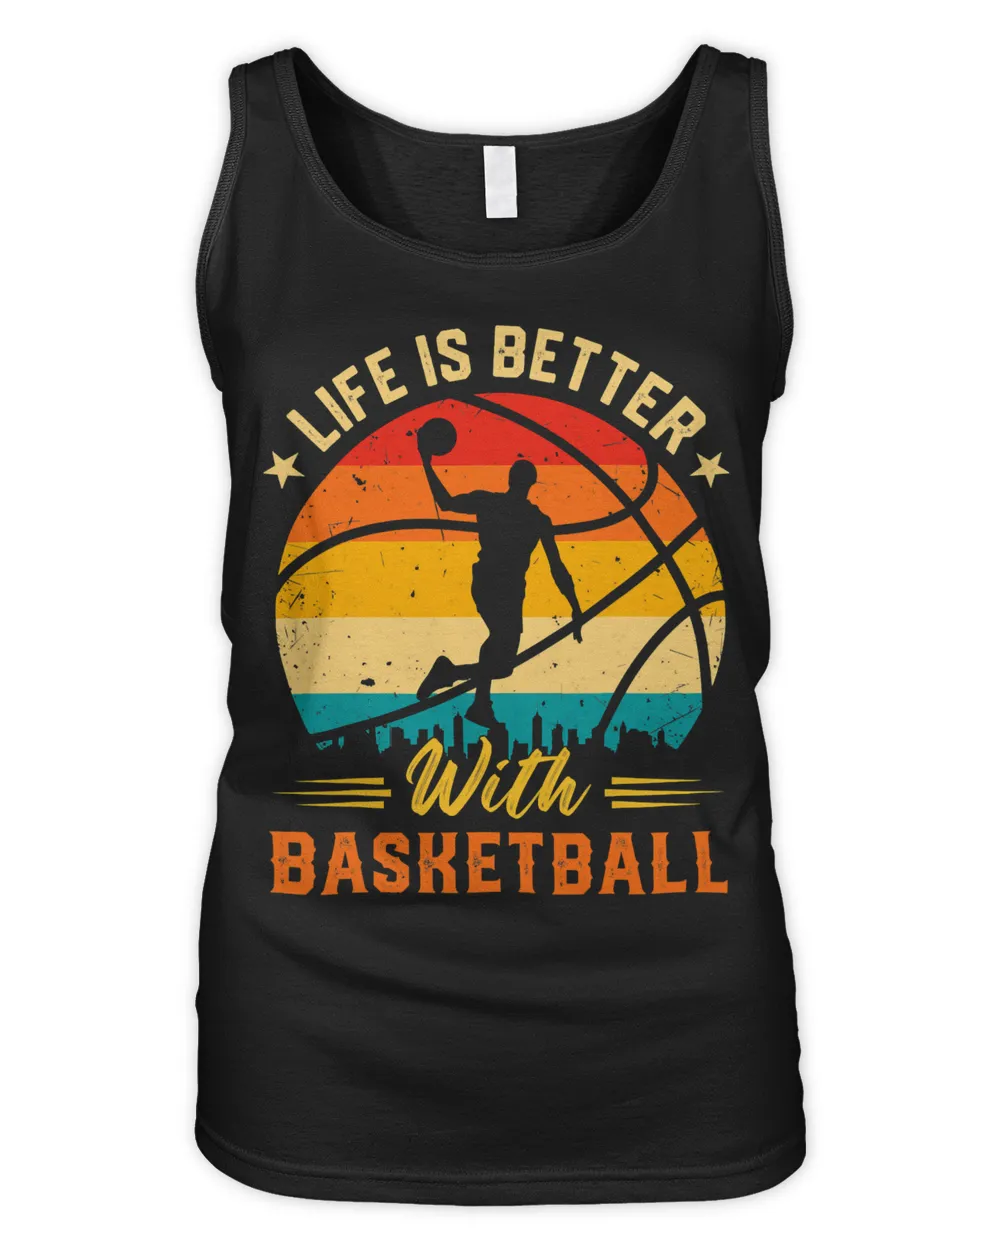 Basketball Coach Life is better with Basketball Player Retro Vintage 135 Basketball